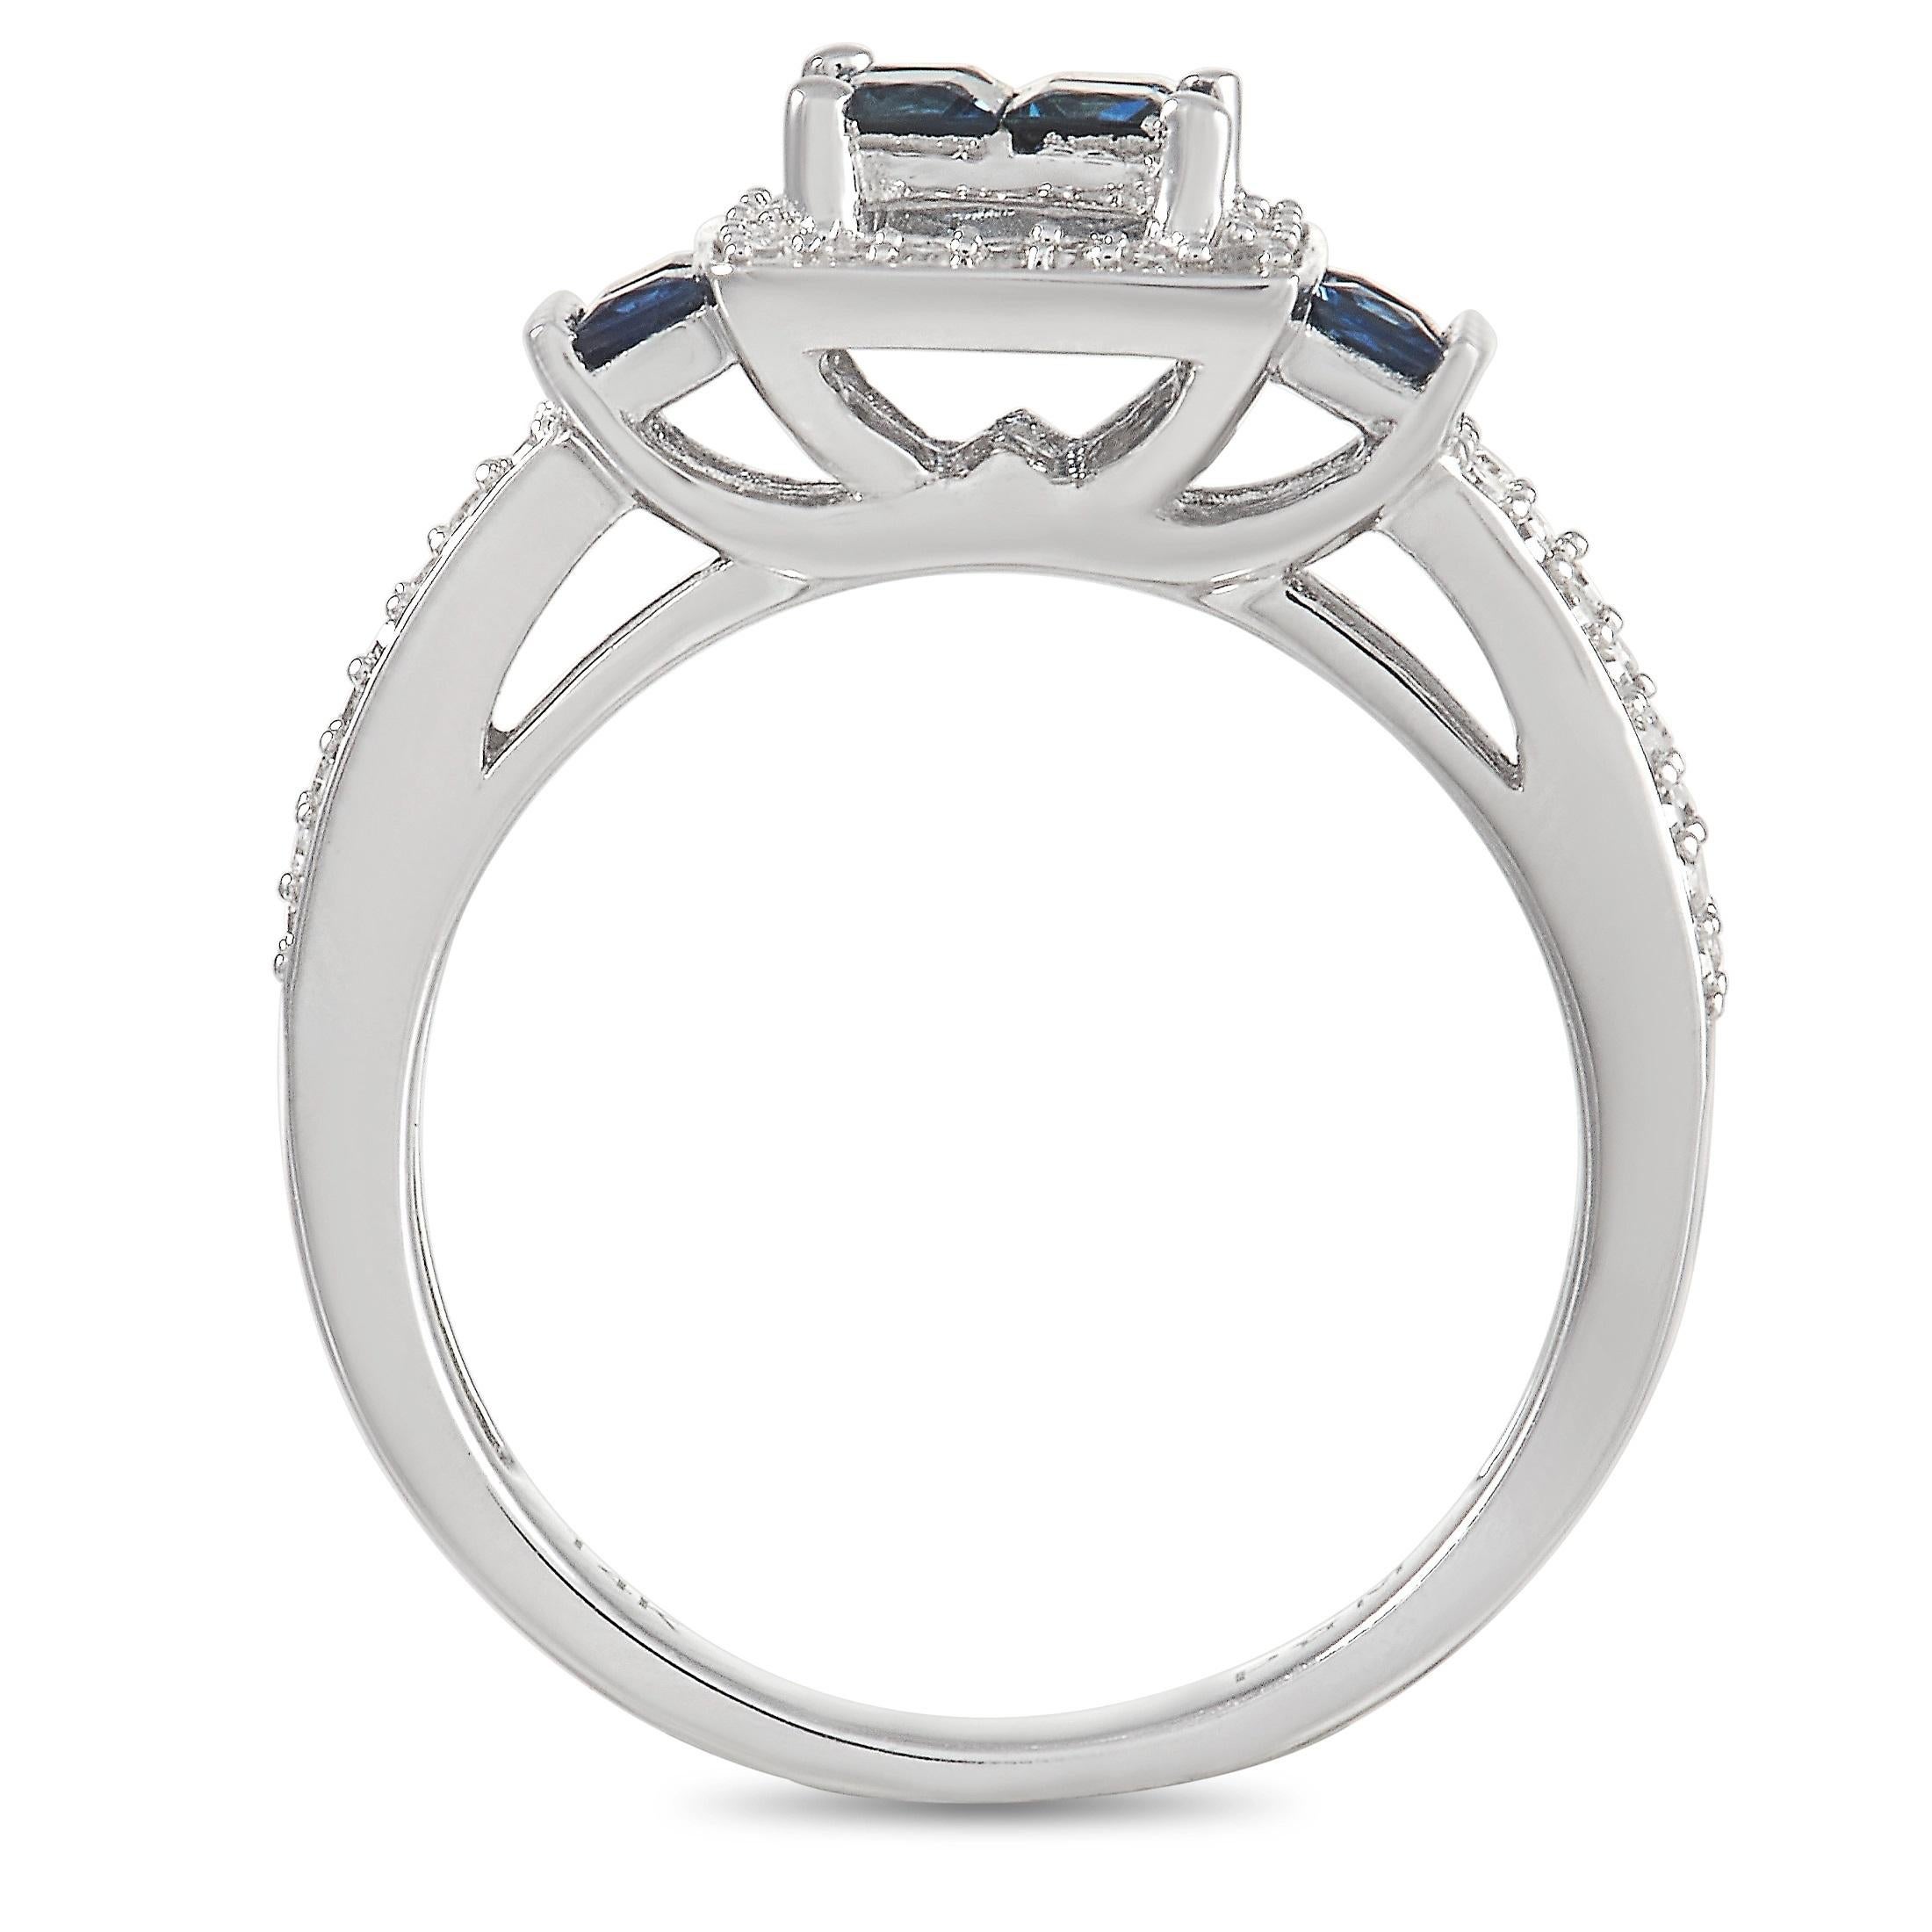 Bold blue sapphires with a total weight of 1.20 carats add a pop of color to this bold ring. Glittering inset diamonds totaling 0.29 carats put the perfect finishing touch on this piece, which includes a 14K White Gold setting with a 3mm wide band